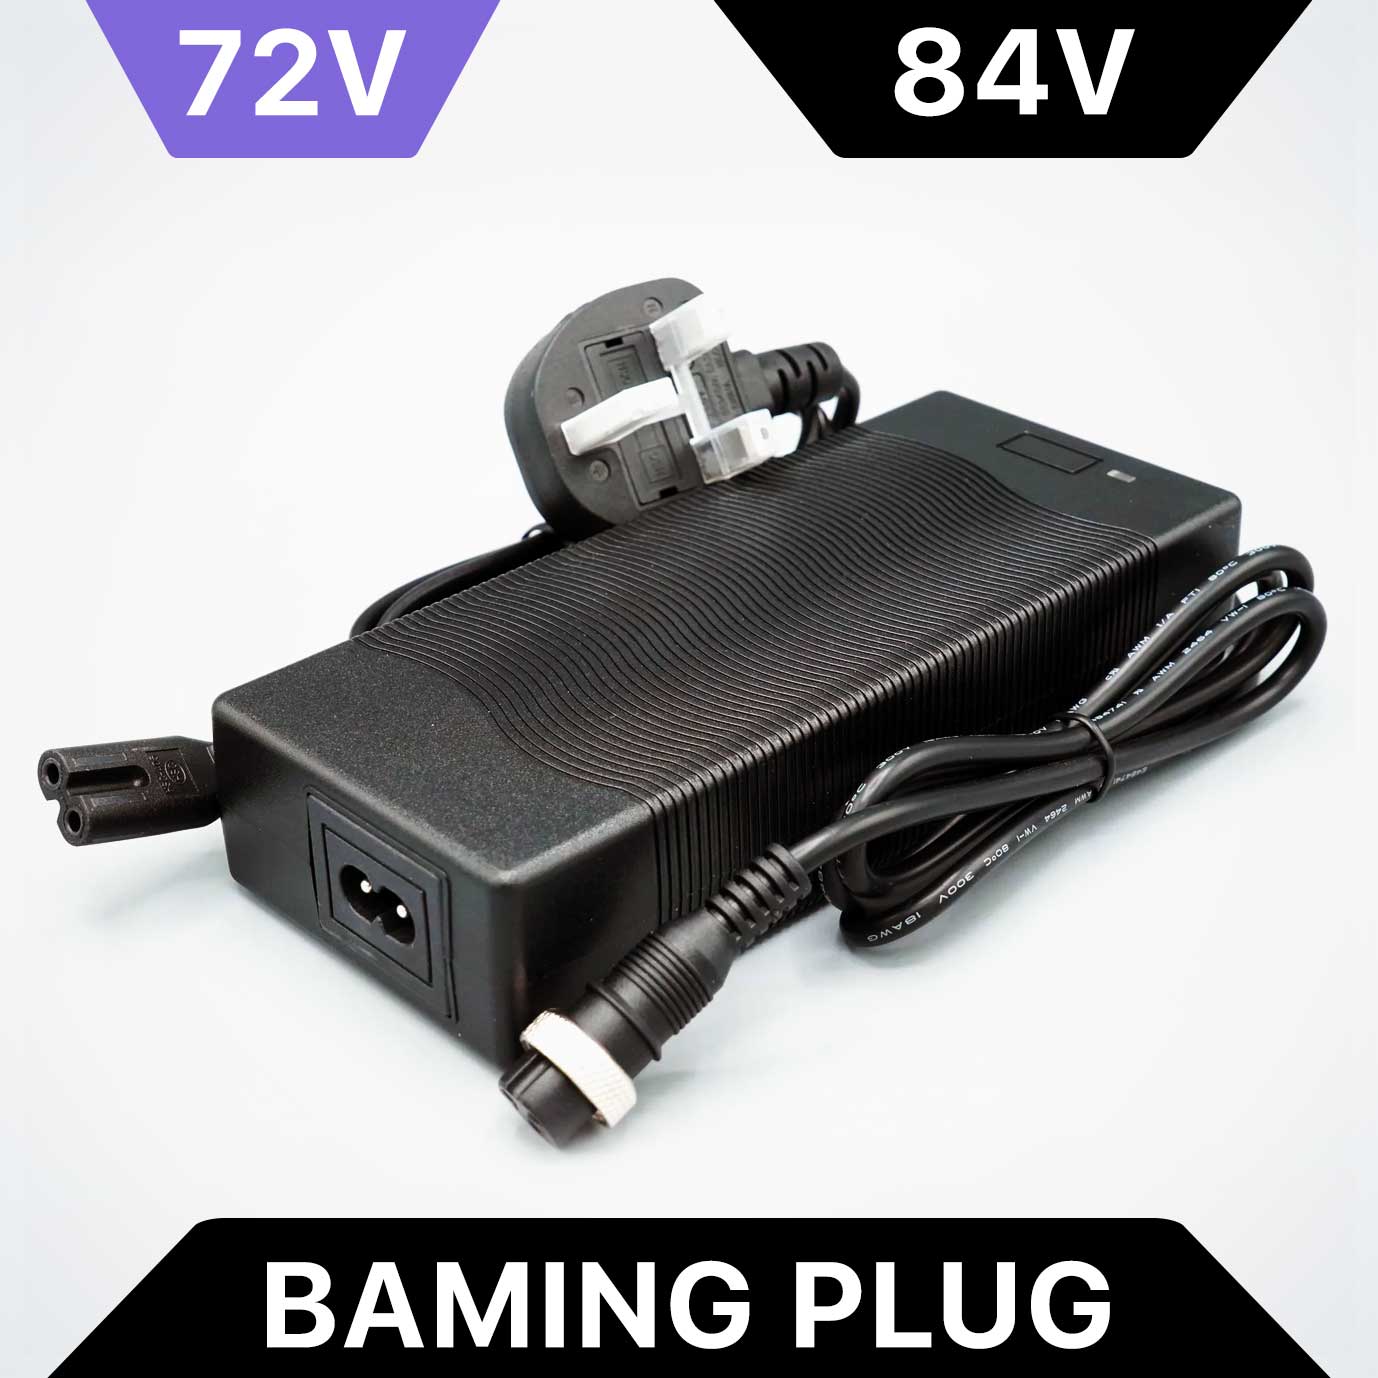 72V 1.4A Slow Charger for Dualtron, 84V Max, Baming